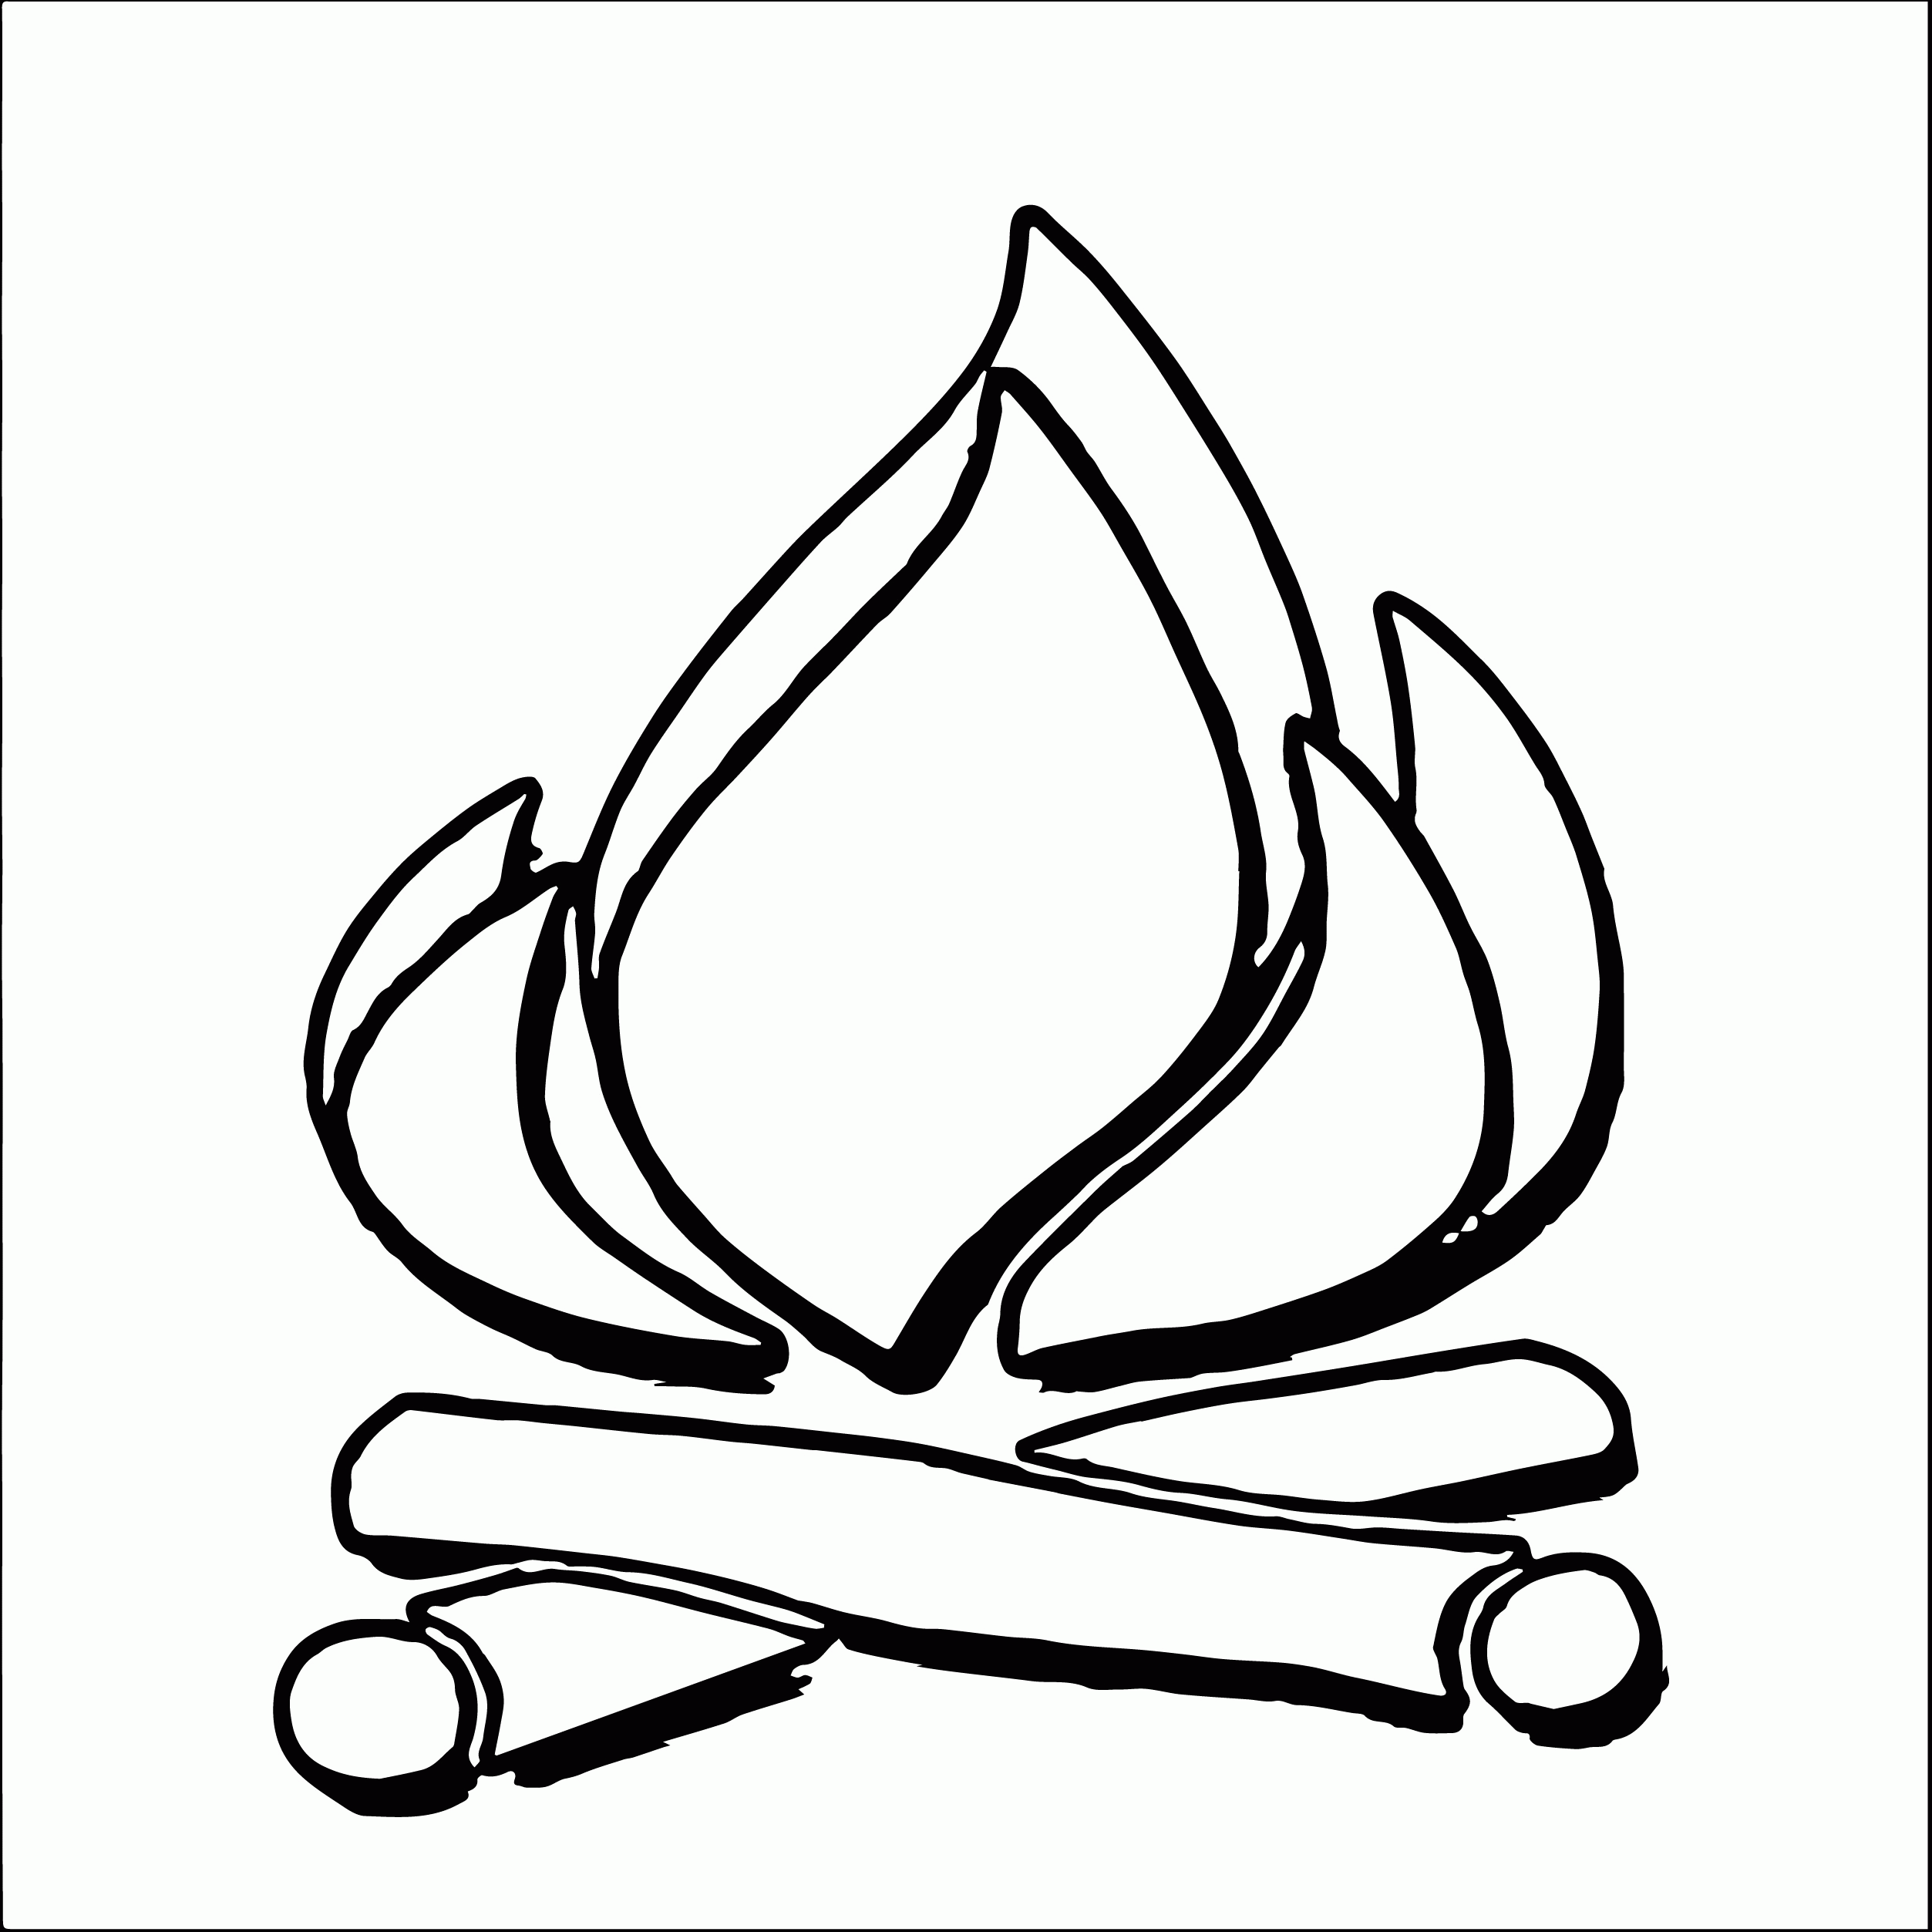 Just Camp Fire–coloring Page | Wecoloringpage